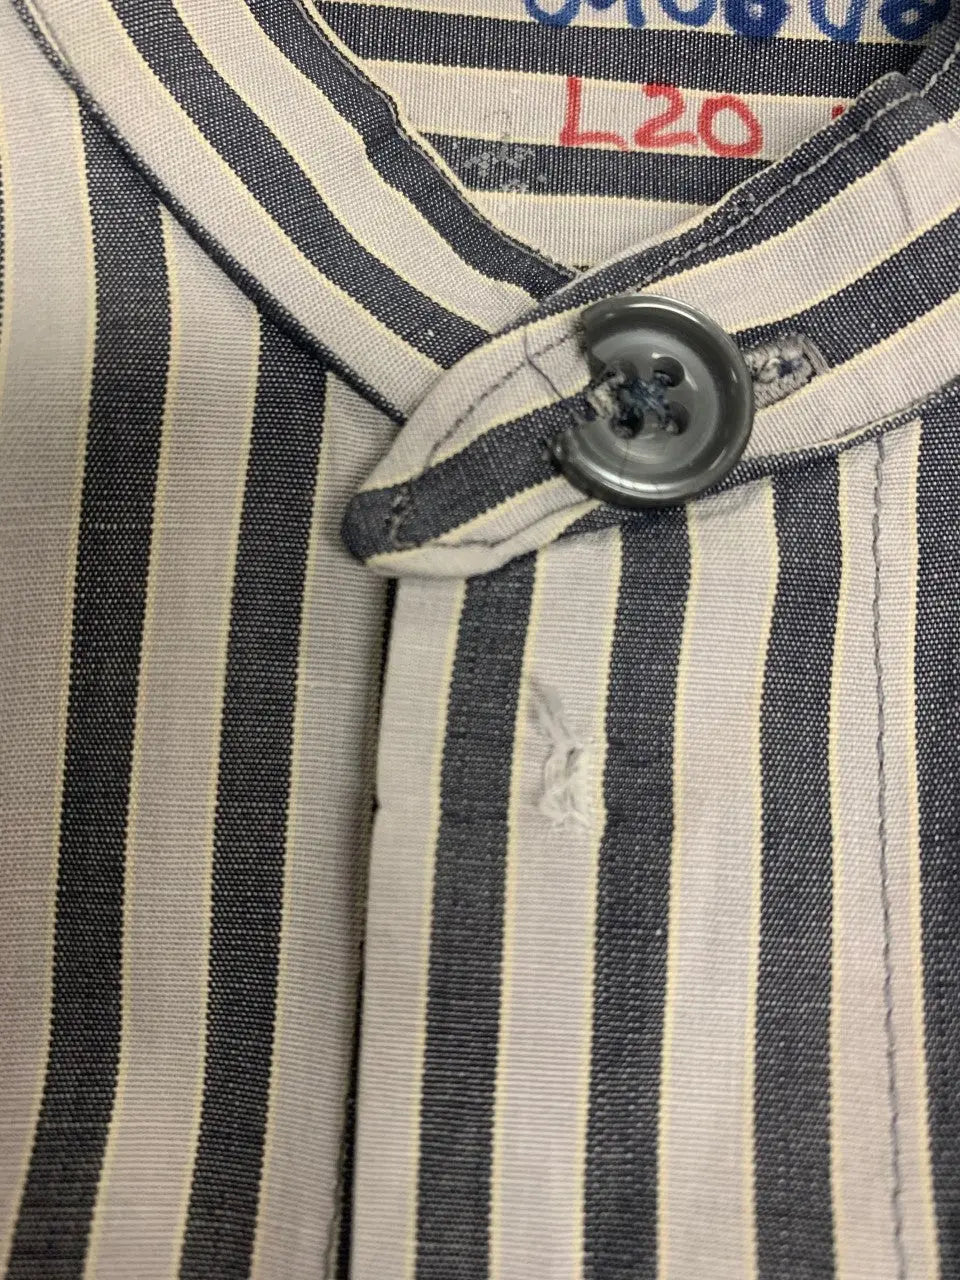 Handmade - Handmade Grandfather Collar Striped Shirt- ThriftTale.com - Vintage and second handclothing